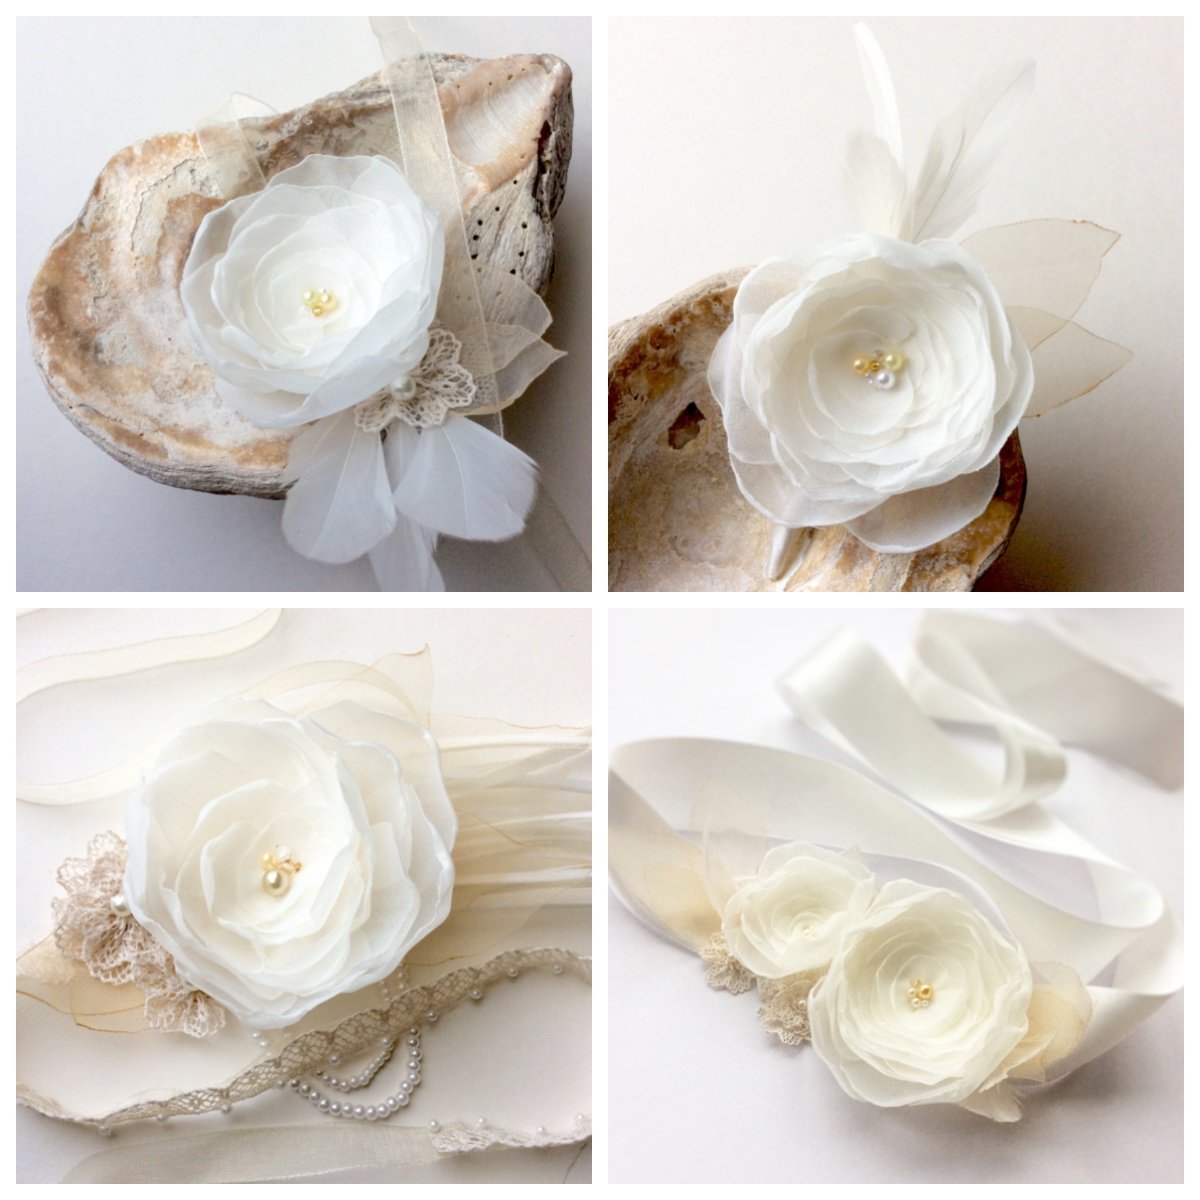 feathers collection - bridal accessories - sash, corsage, boutonniere, headband, wedding